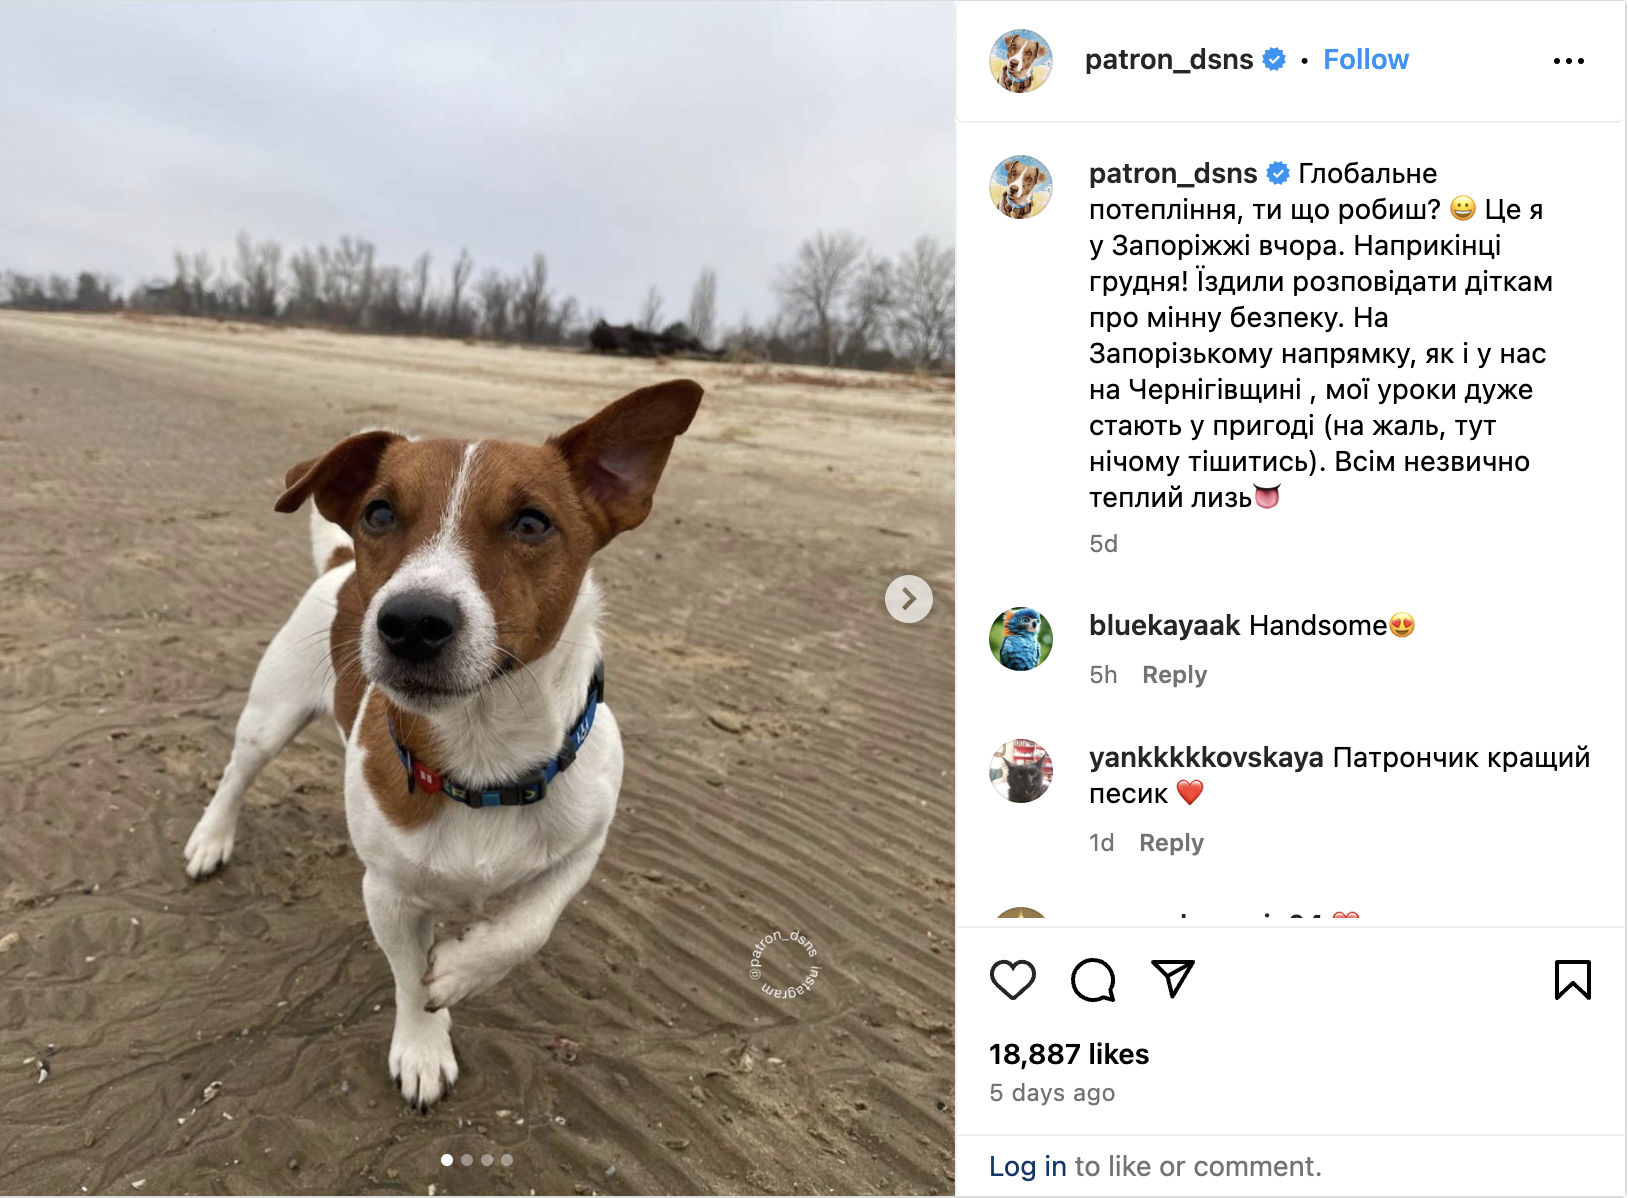 Screen shot of a post from Patron the Sapper dog's Instagram page from 21 DEC 2023. Patron is on the beach in Zaporizhzhia Oblast, Ukraine. He is a brown and white short haired Jack Russell terrier and is facing the camera. The caption machine translates as: "in Zaporizhzhia yesterday. At the end of December! We went to tell children about mine safety. In the Zaporizhzhia direction, as well as in our Chernihiv region, my lessons are very useful (unfortunately, there is nothing to be happy about). Everyone is unusually warm!!!!"